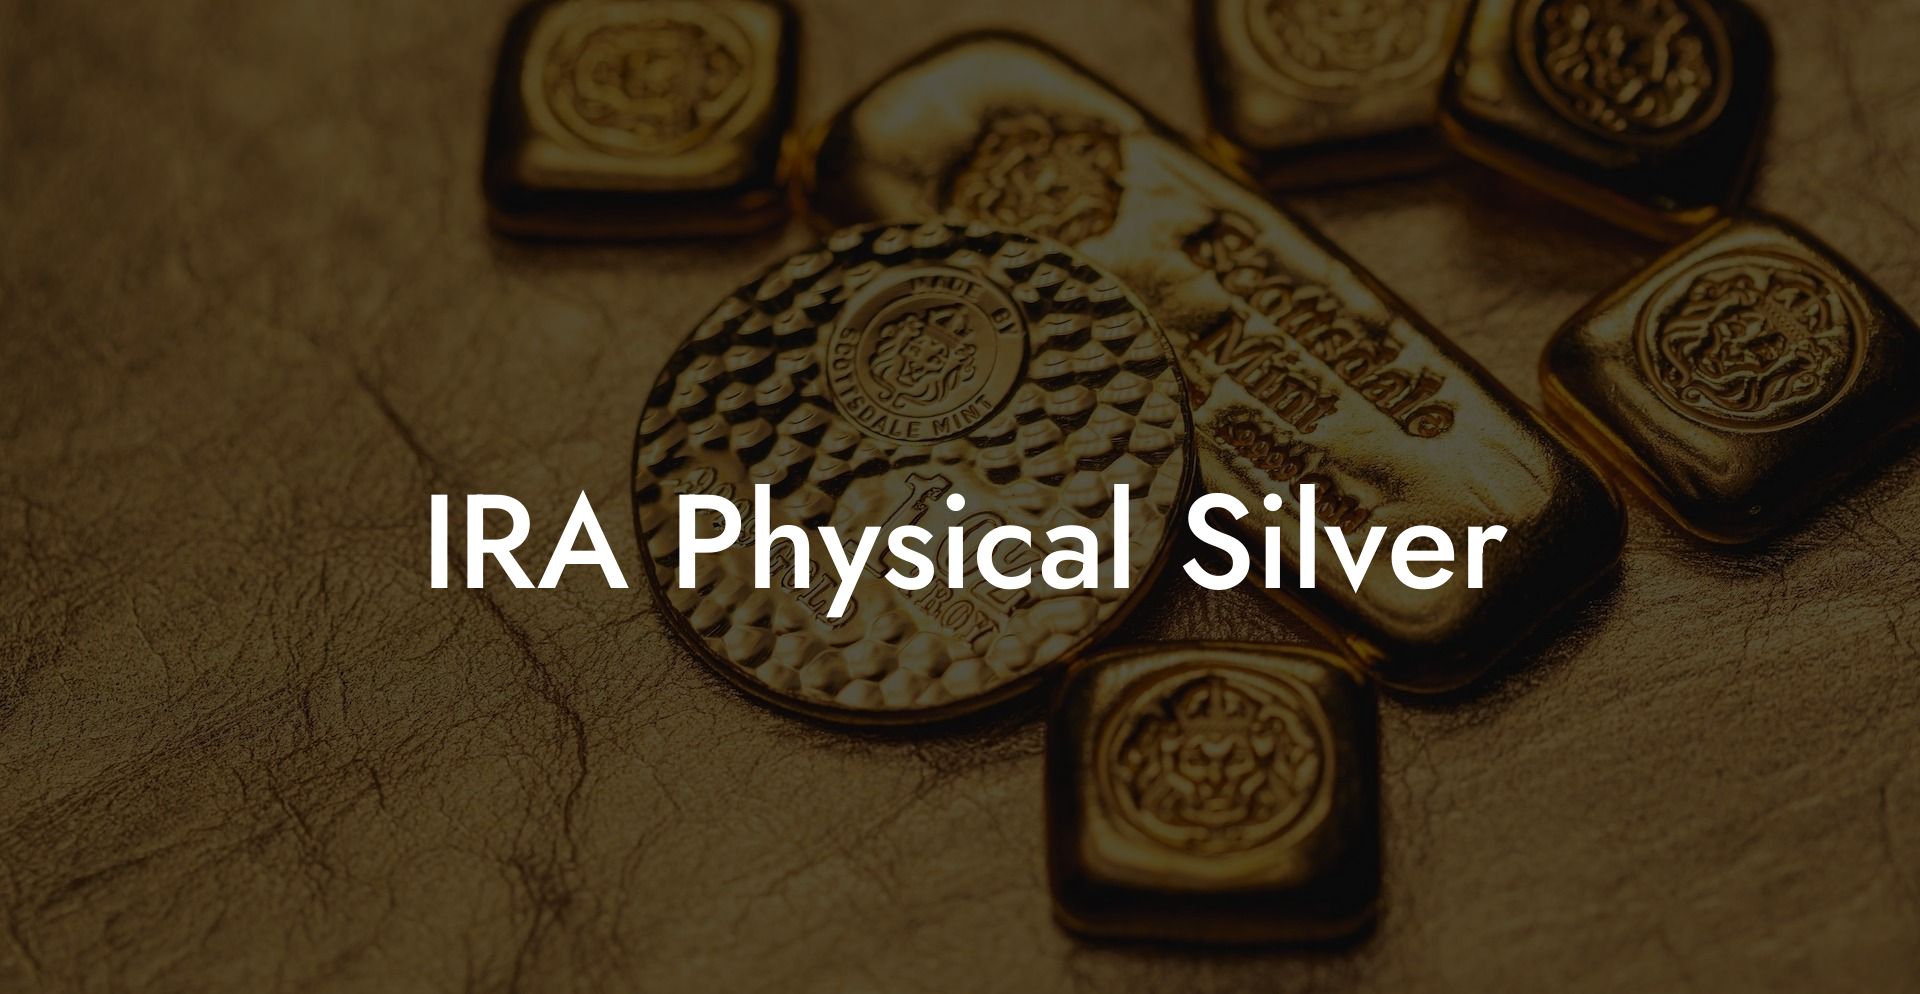 IRA Physical Silver